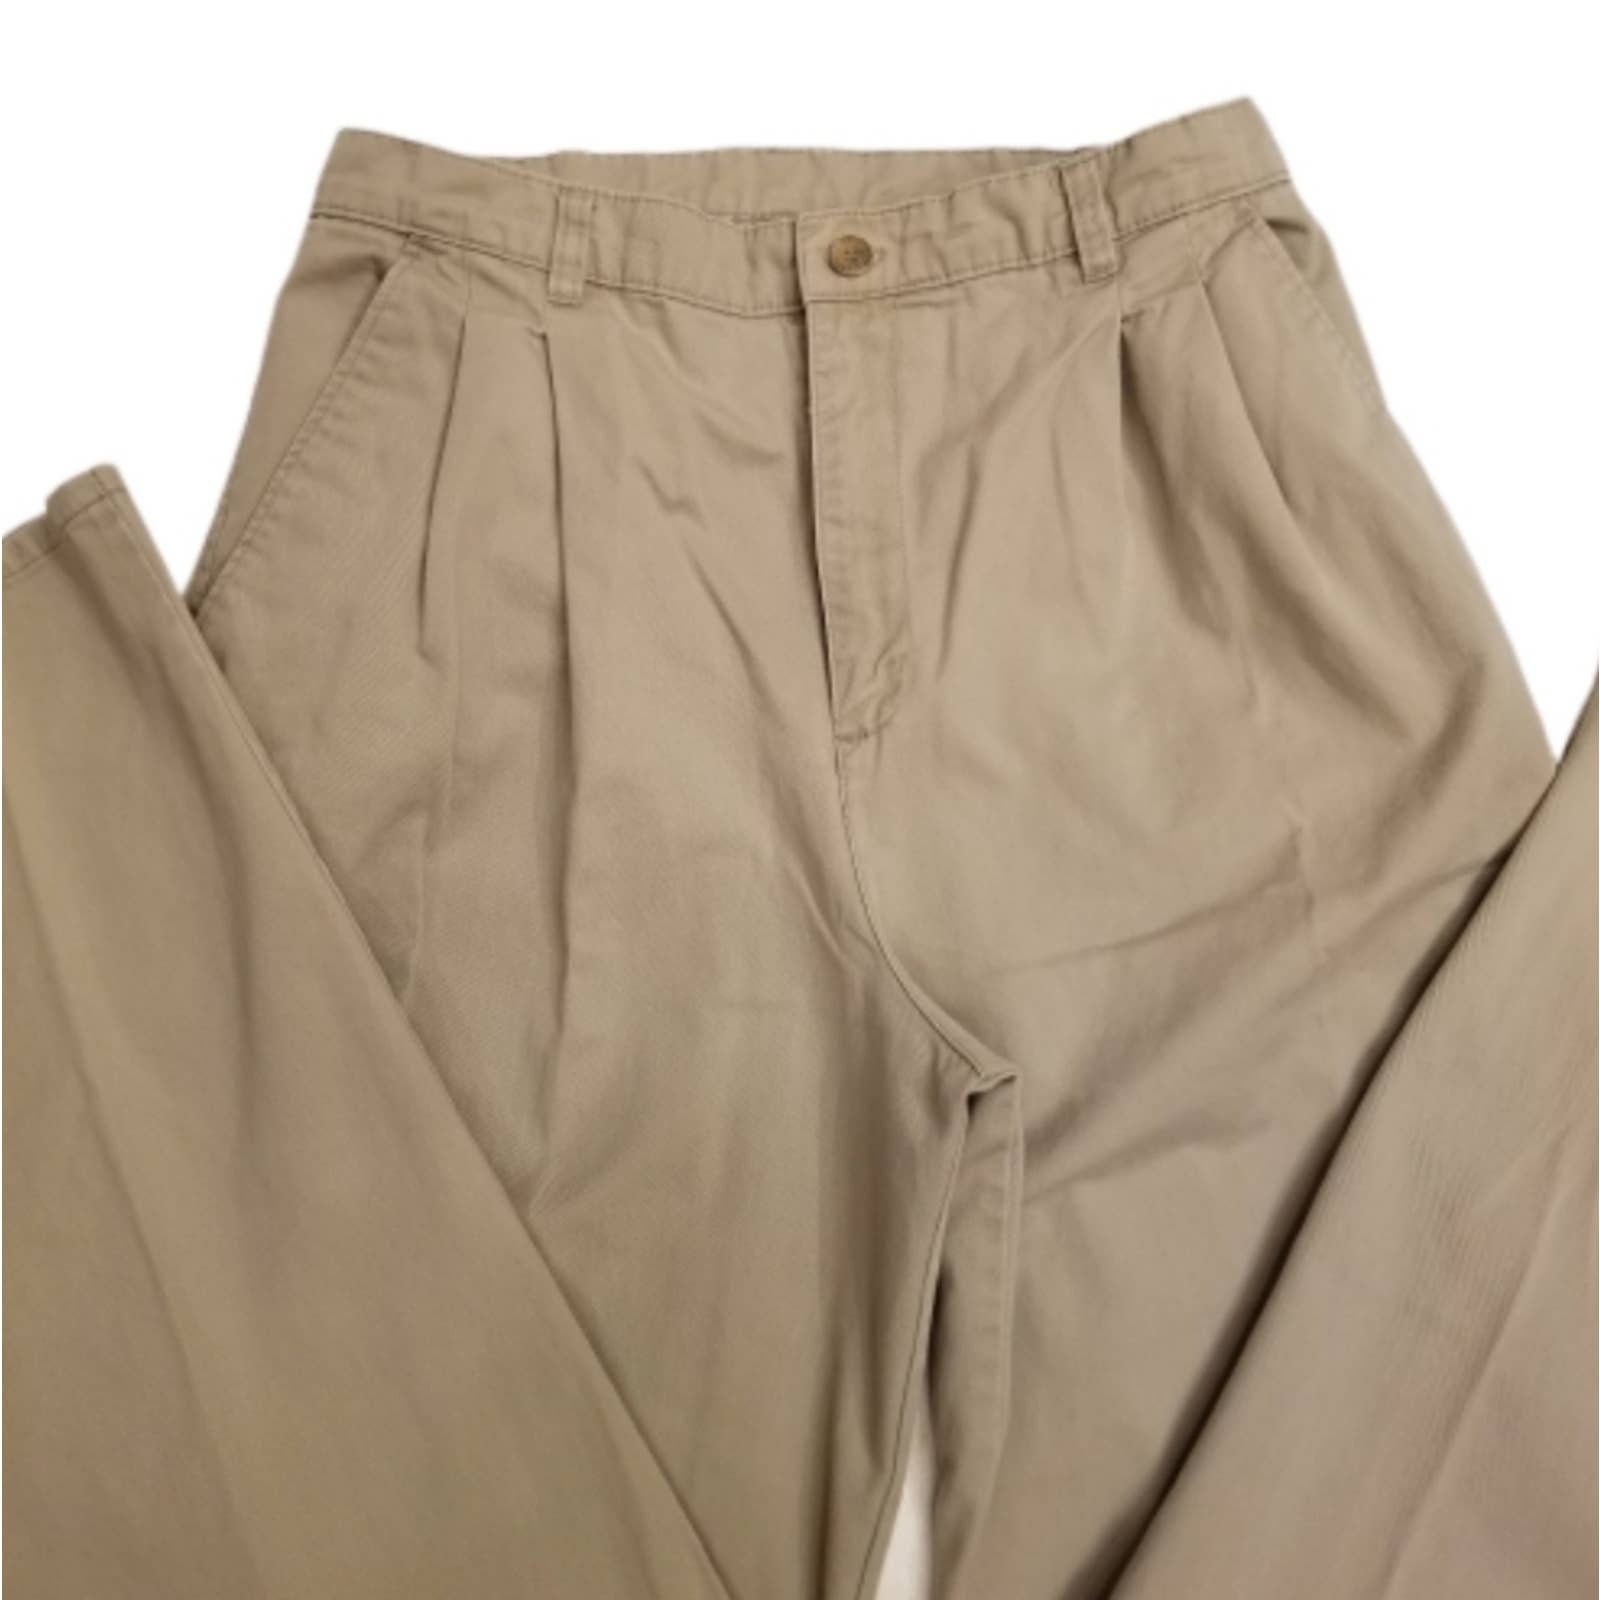 White Stag Vintage Pleated Tapered Tan Trouser Pants Size 8 - Etsy UK